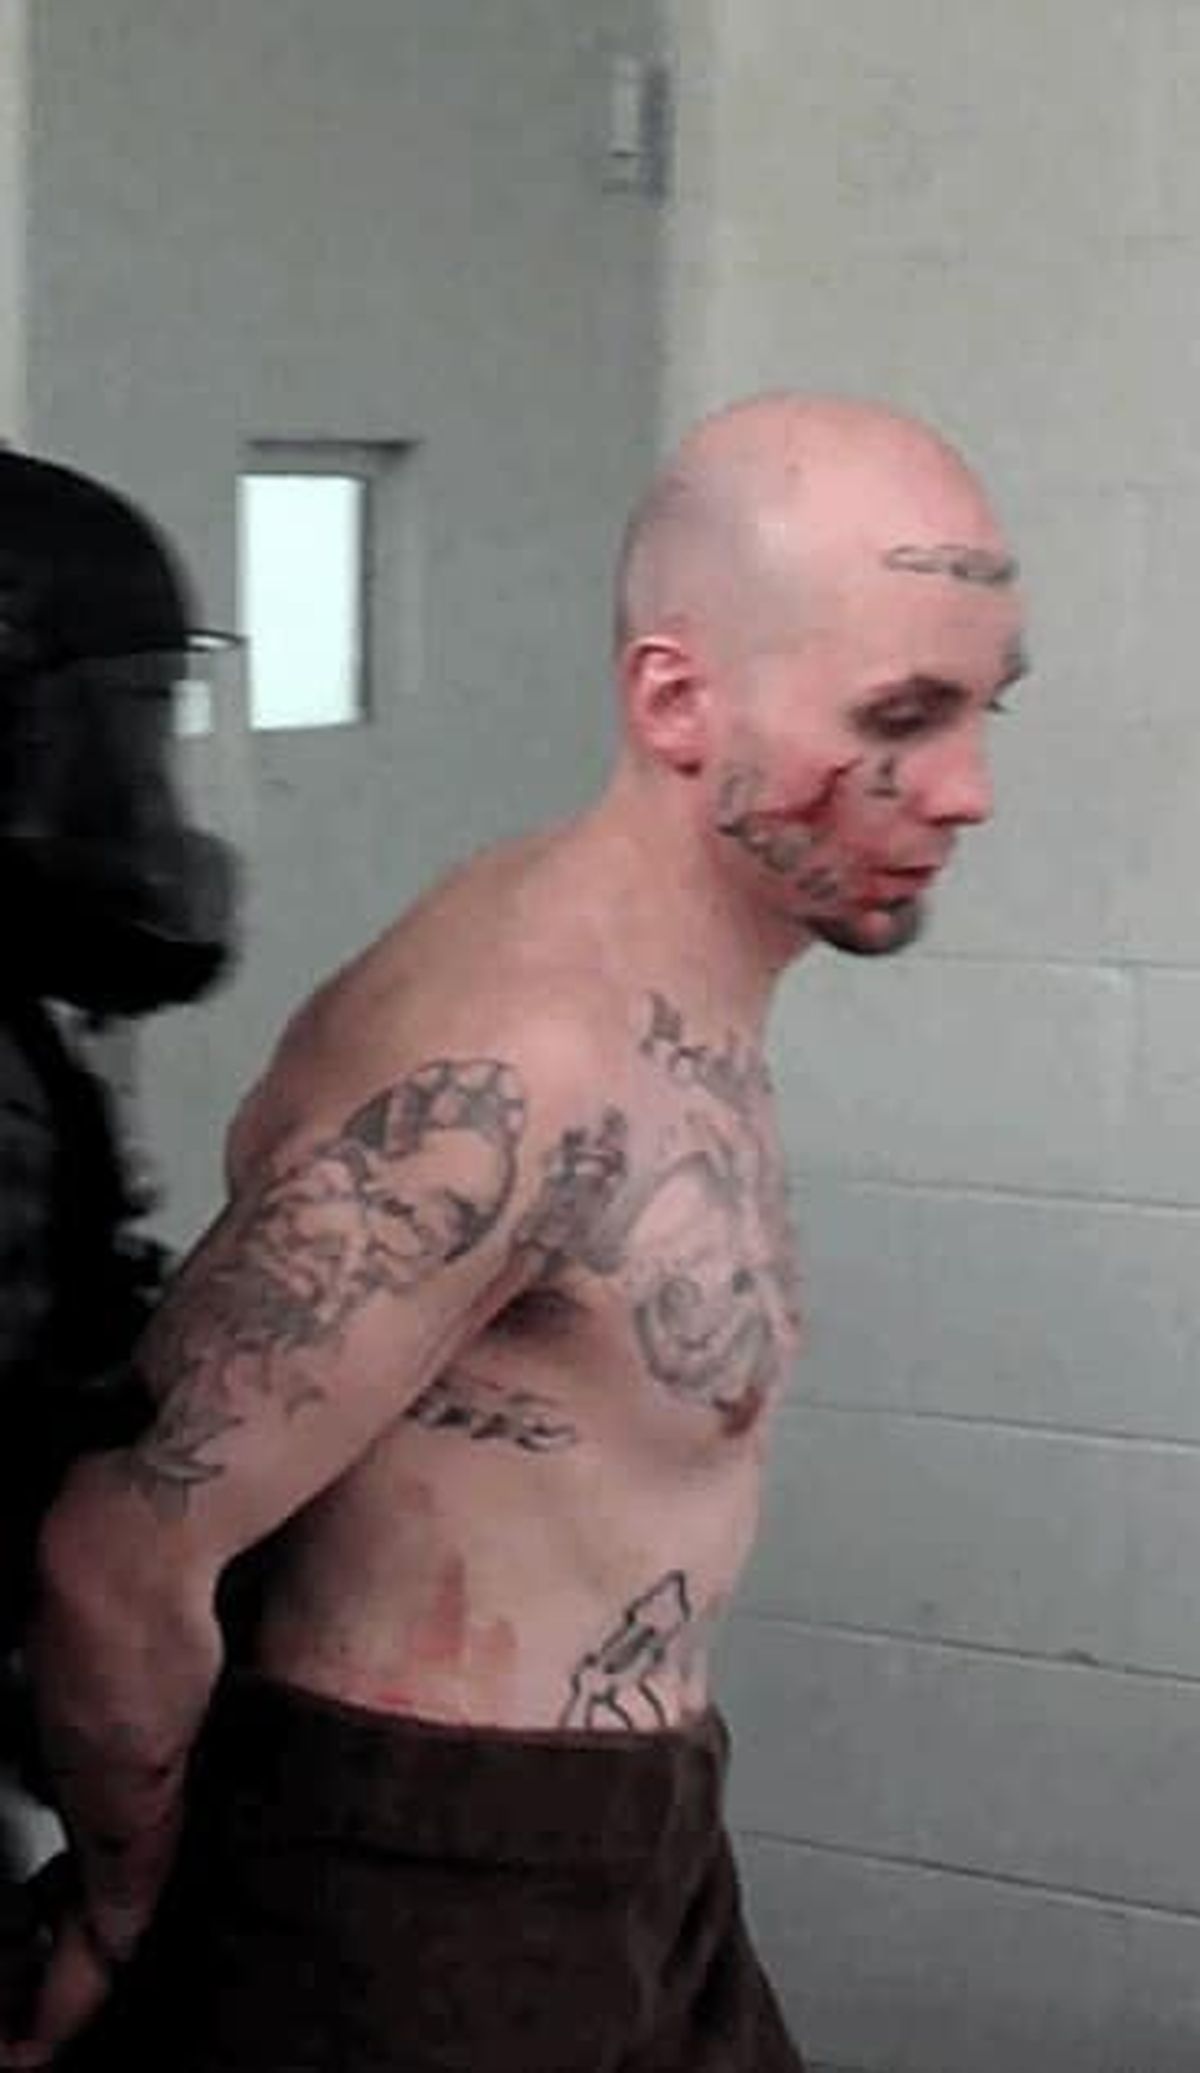 Skylar Meade, an inmate at the Idaho Maximum Security prison in Kuna, Idaho, is accused of escaping prison and fleeing with his alleged accomplice, Nicholas Umphenour.  (Courtesy of Boise Police Department)